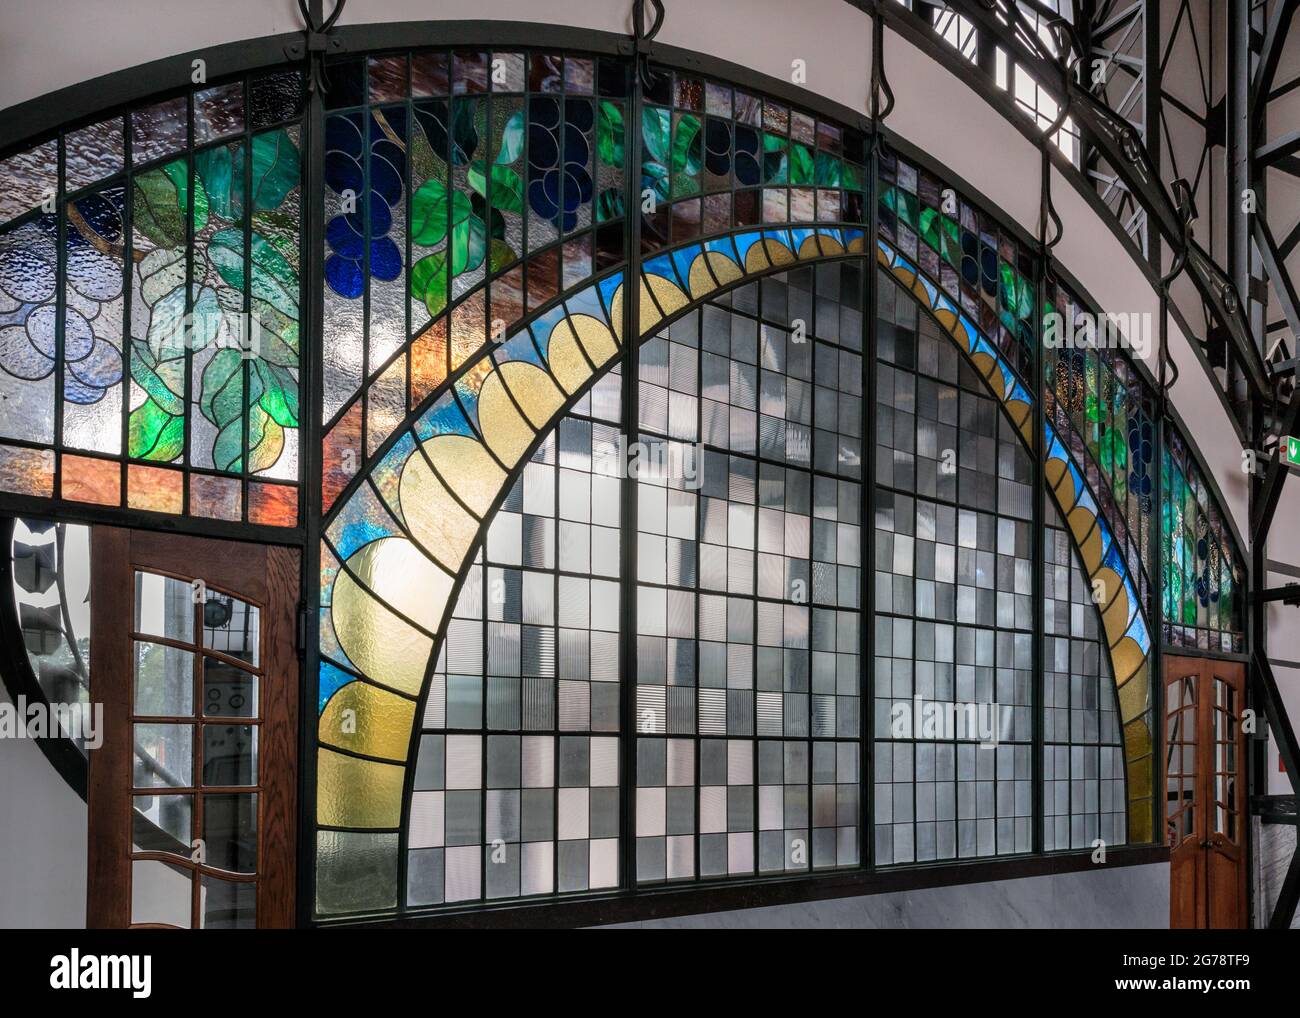 Art Nouveau stained glass window of the portal of the machine hall at Zeche Zollern colliery industrial heritage site, Dortmund, Ruhr area, Germany Stock Photo